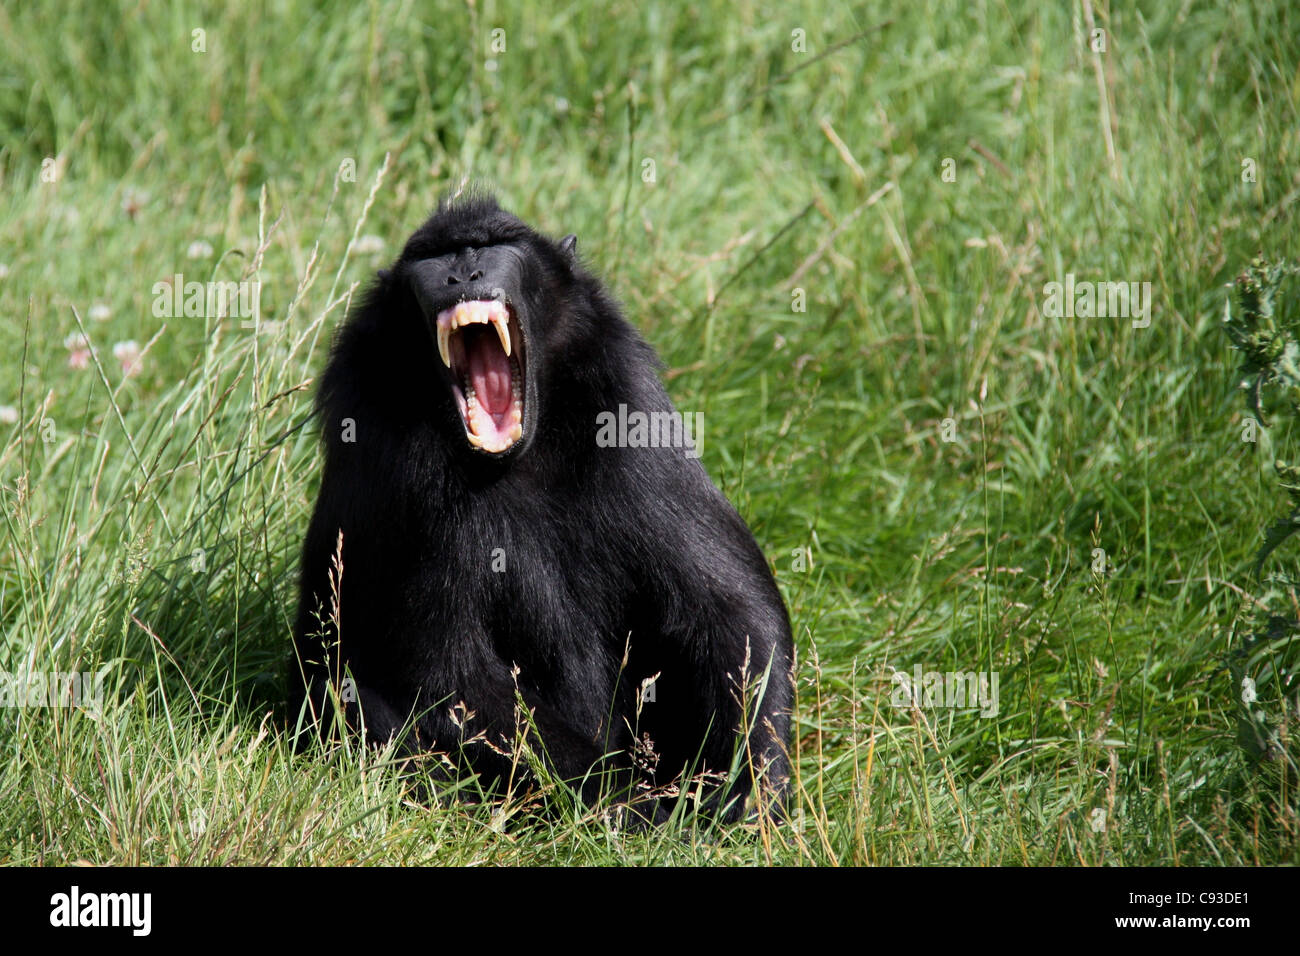 Sulawesi Crested Macaque, schwarze Affe Stockfoto